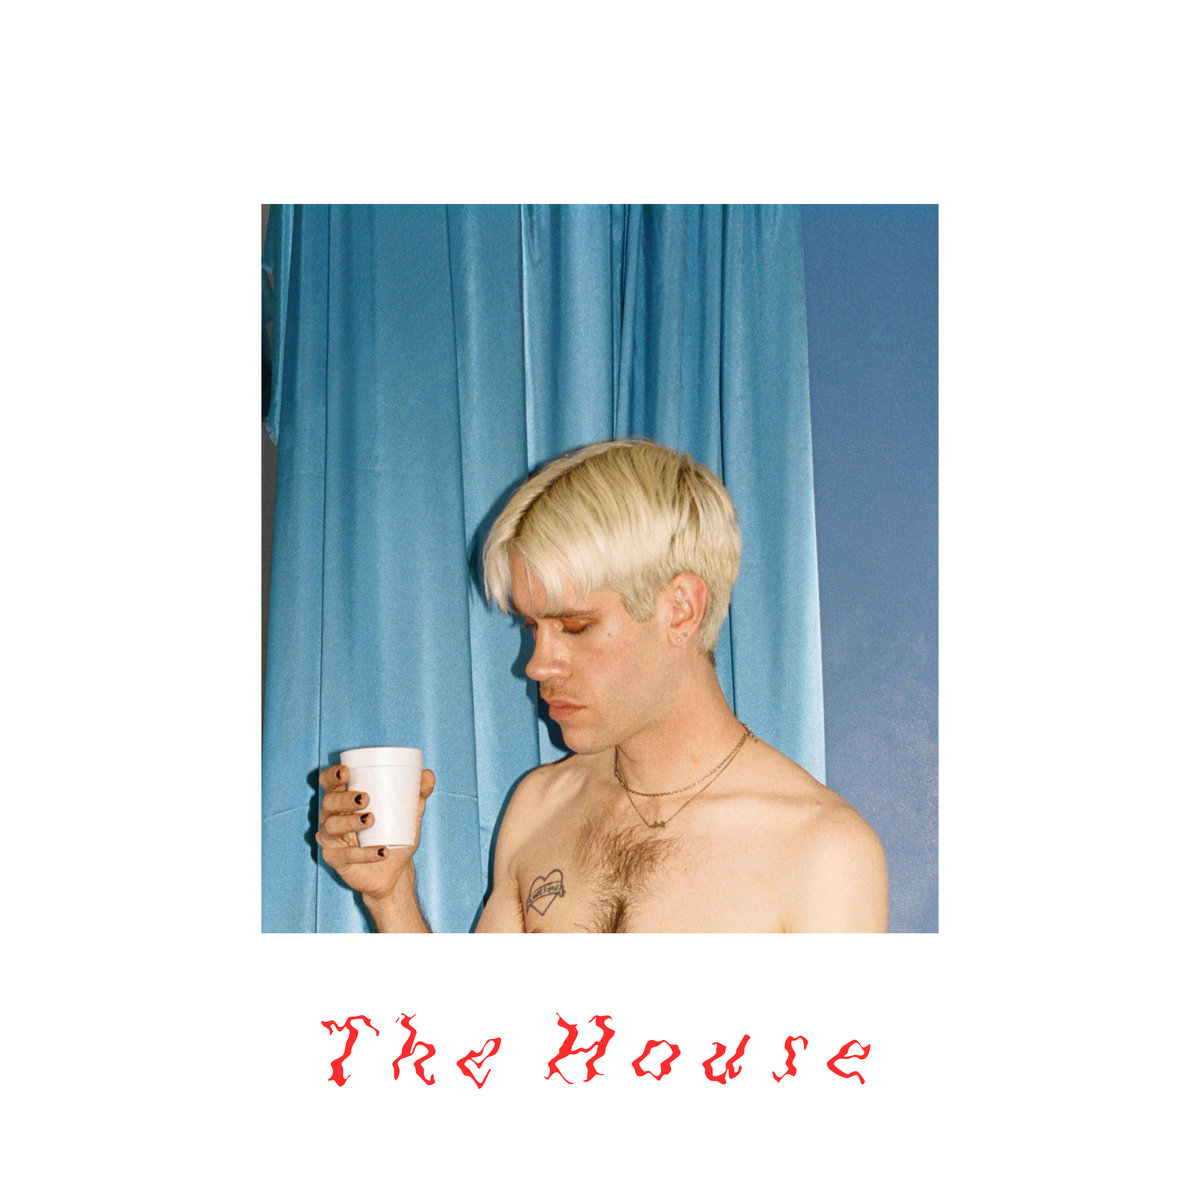 Porches' Aaron Maine Responds to Accusations of "Posturing as Queer for Capital Gain" [UPDATE]